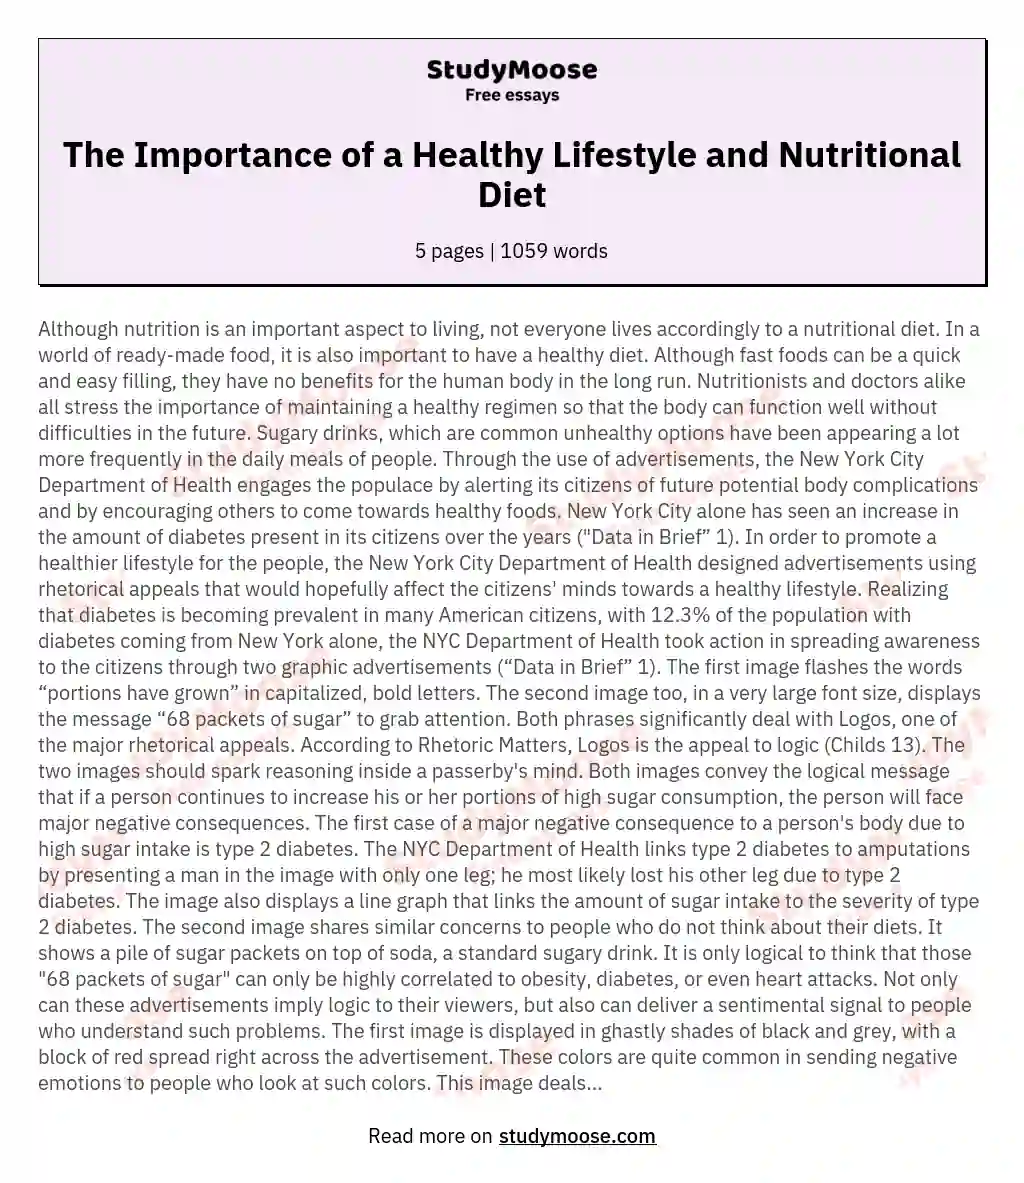 The Importance of a Healthy Lifestyle and Nutritional Diet essay